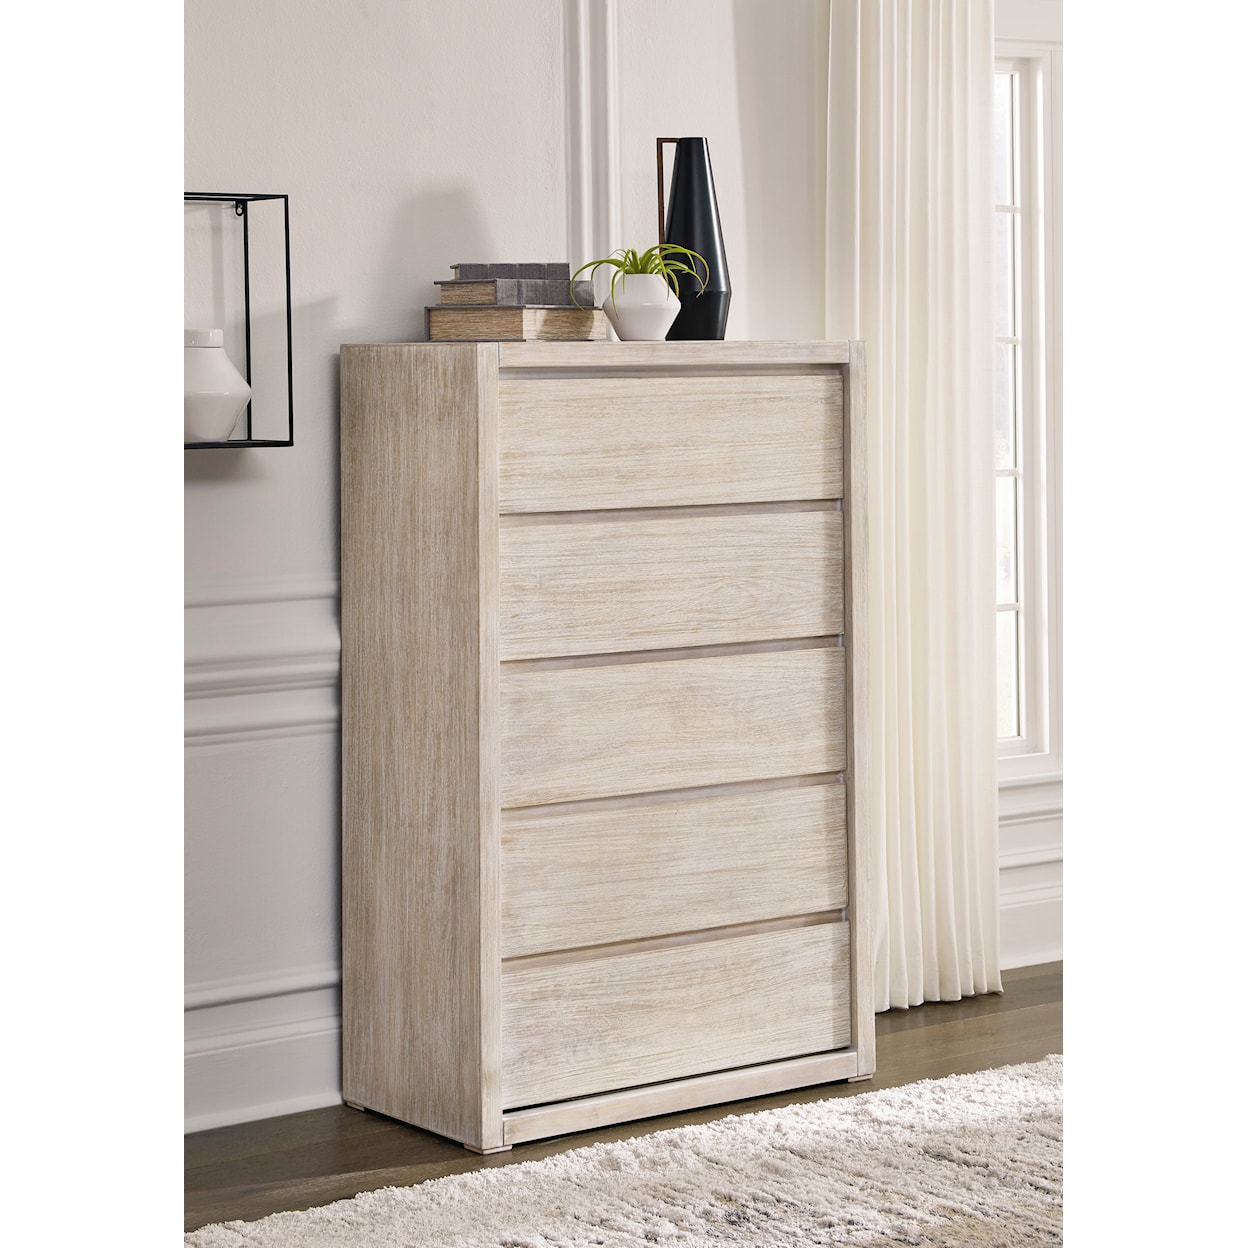 Benchcraft Michelia Chest of Drawers